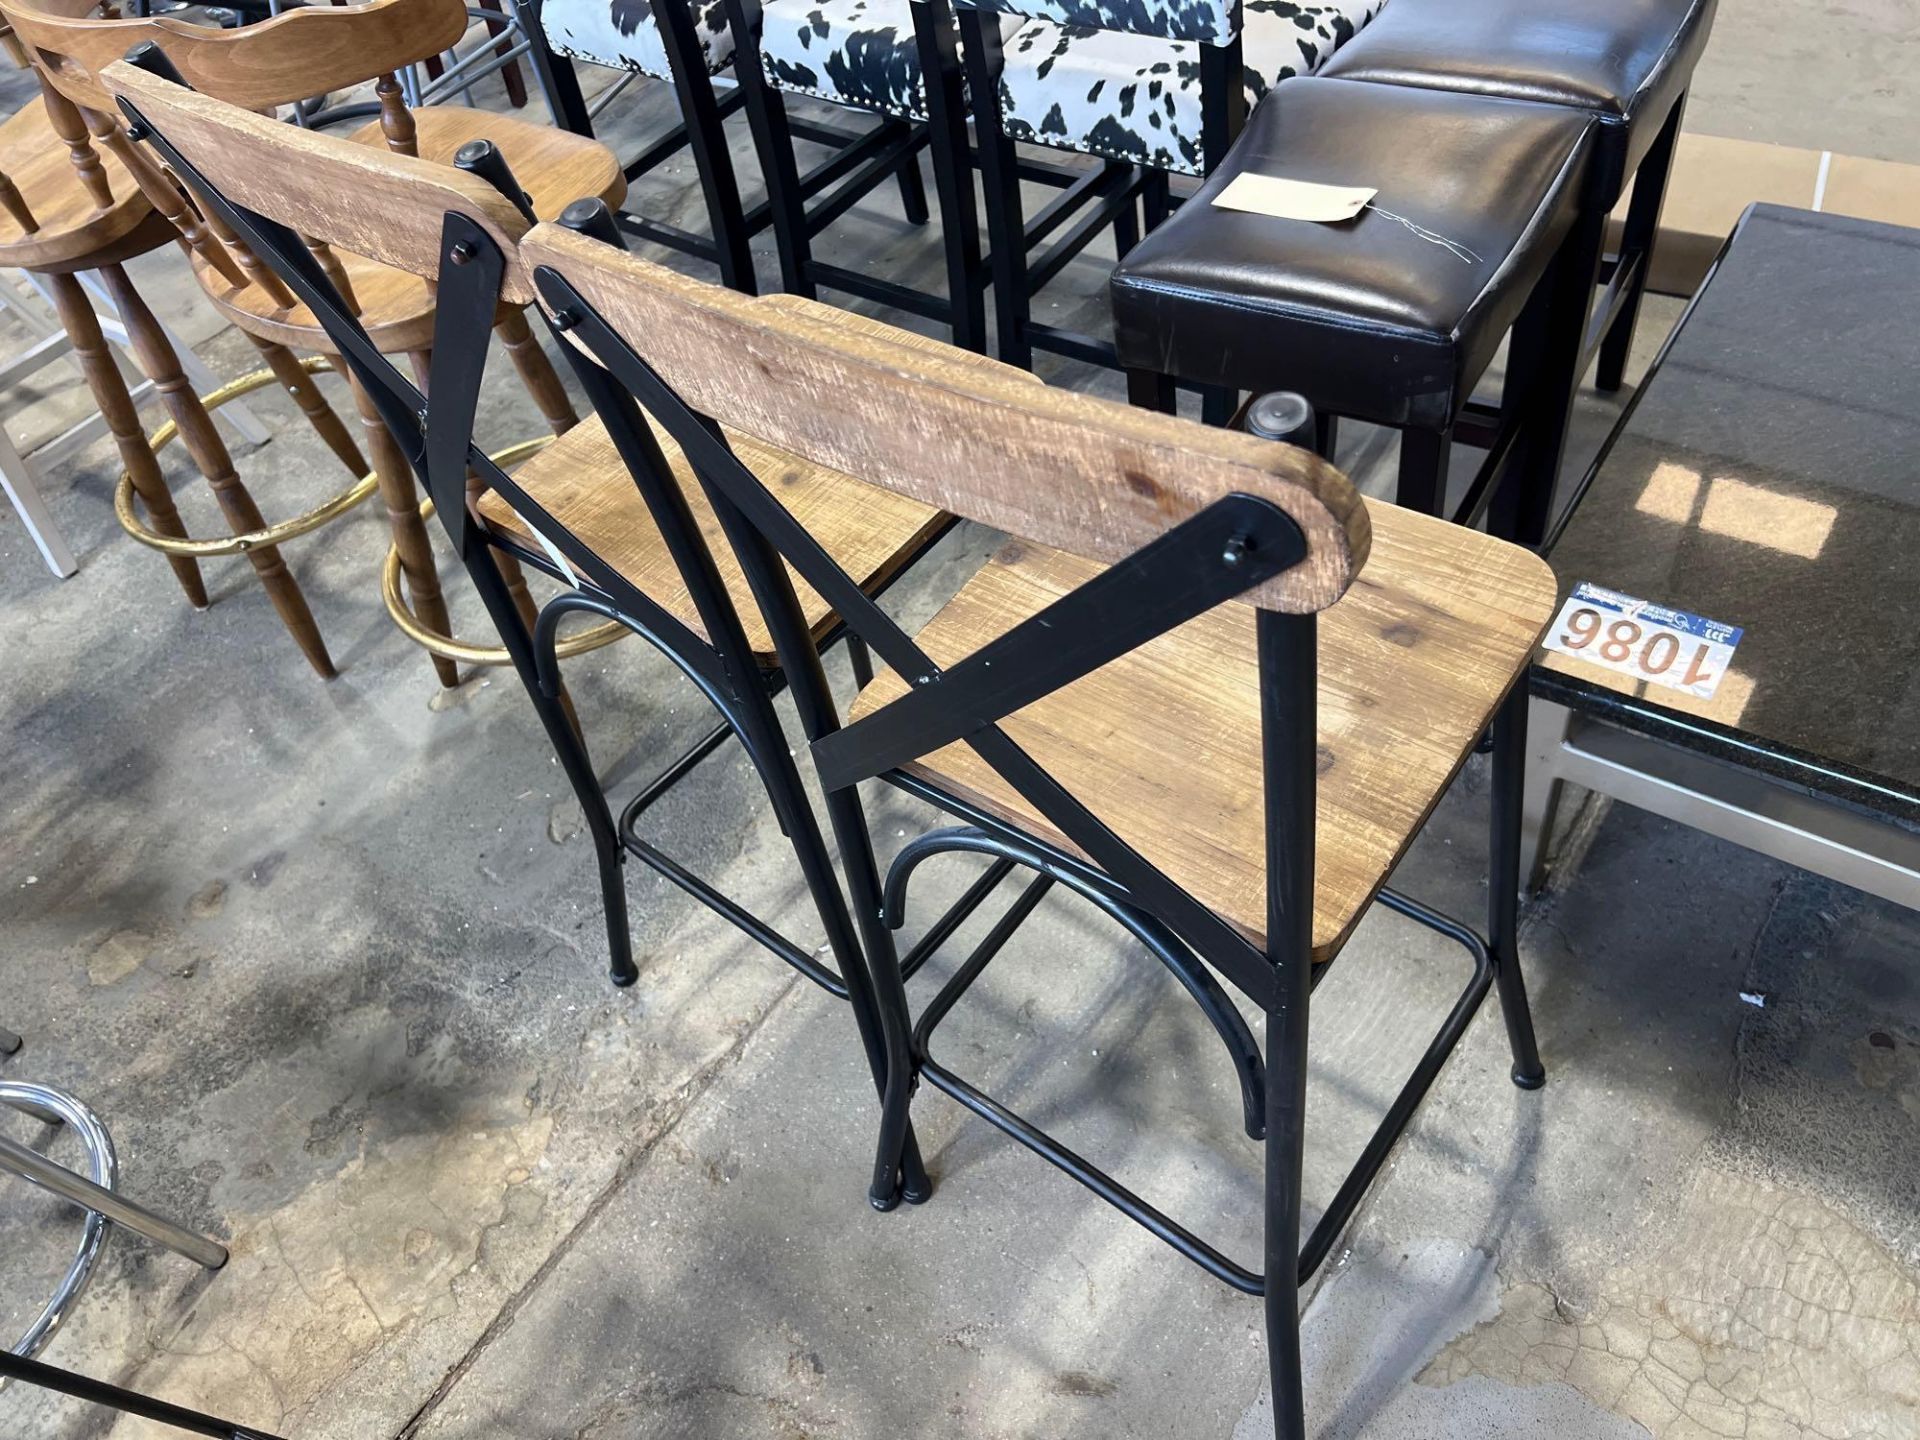 2 Metal and Wood Stools - Image 2 of 2